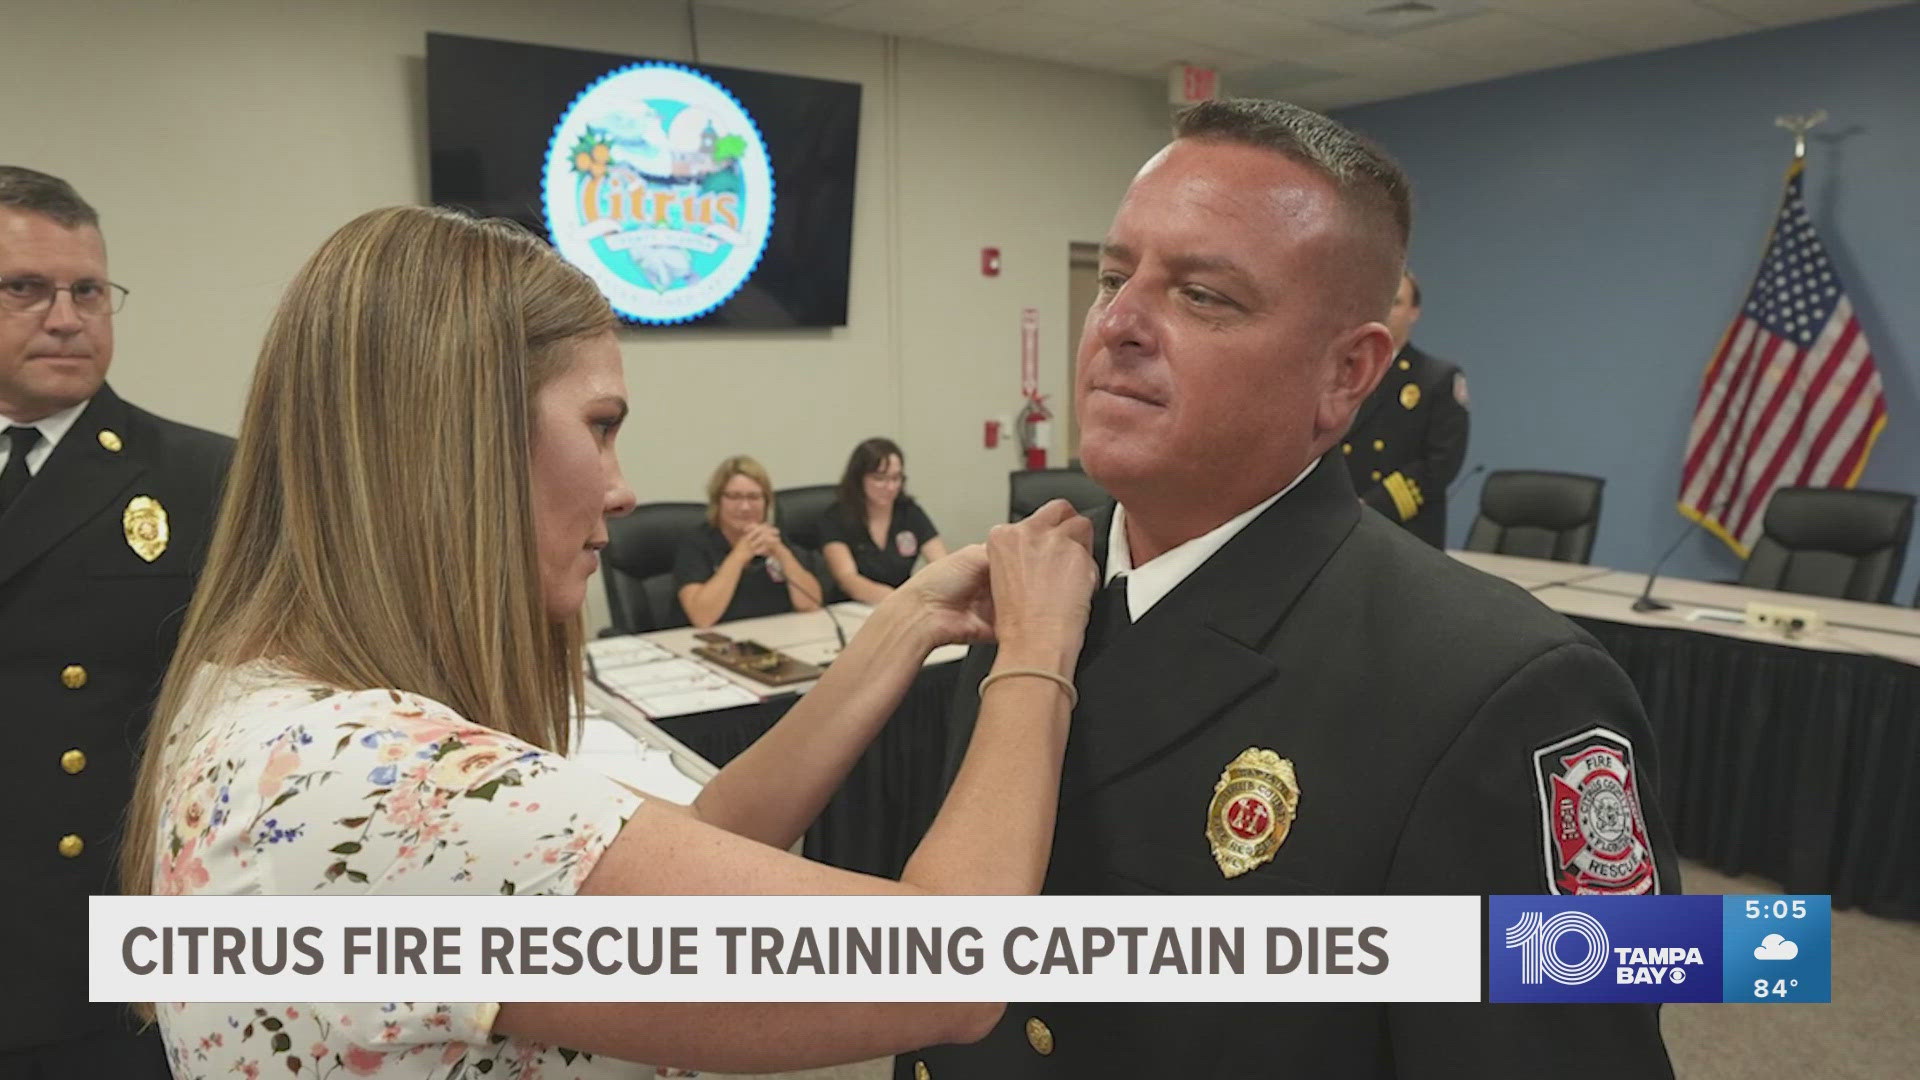 Citrus County Fire Rescue crews are mourning the loss of one of their "esteemed" training captains, Michael Fletcher on July 4 in an off-duty boating accident.